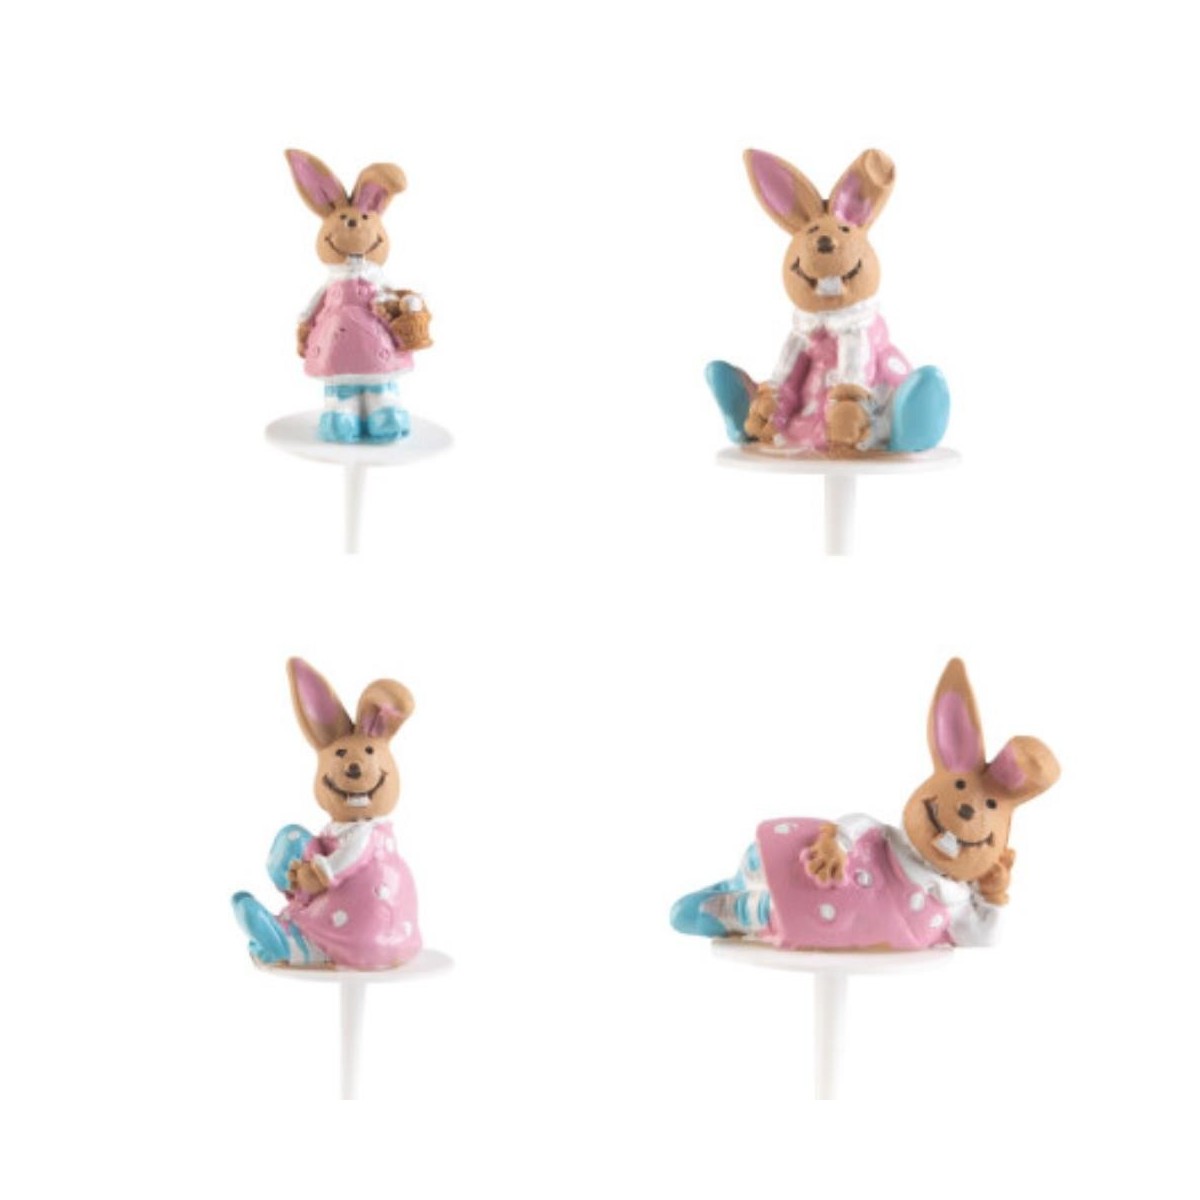 69875 LAPIN ROBE ROSE  32PCES S/CDE